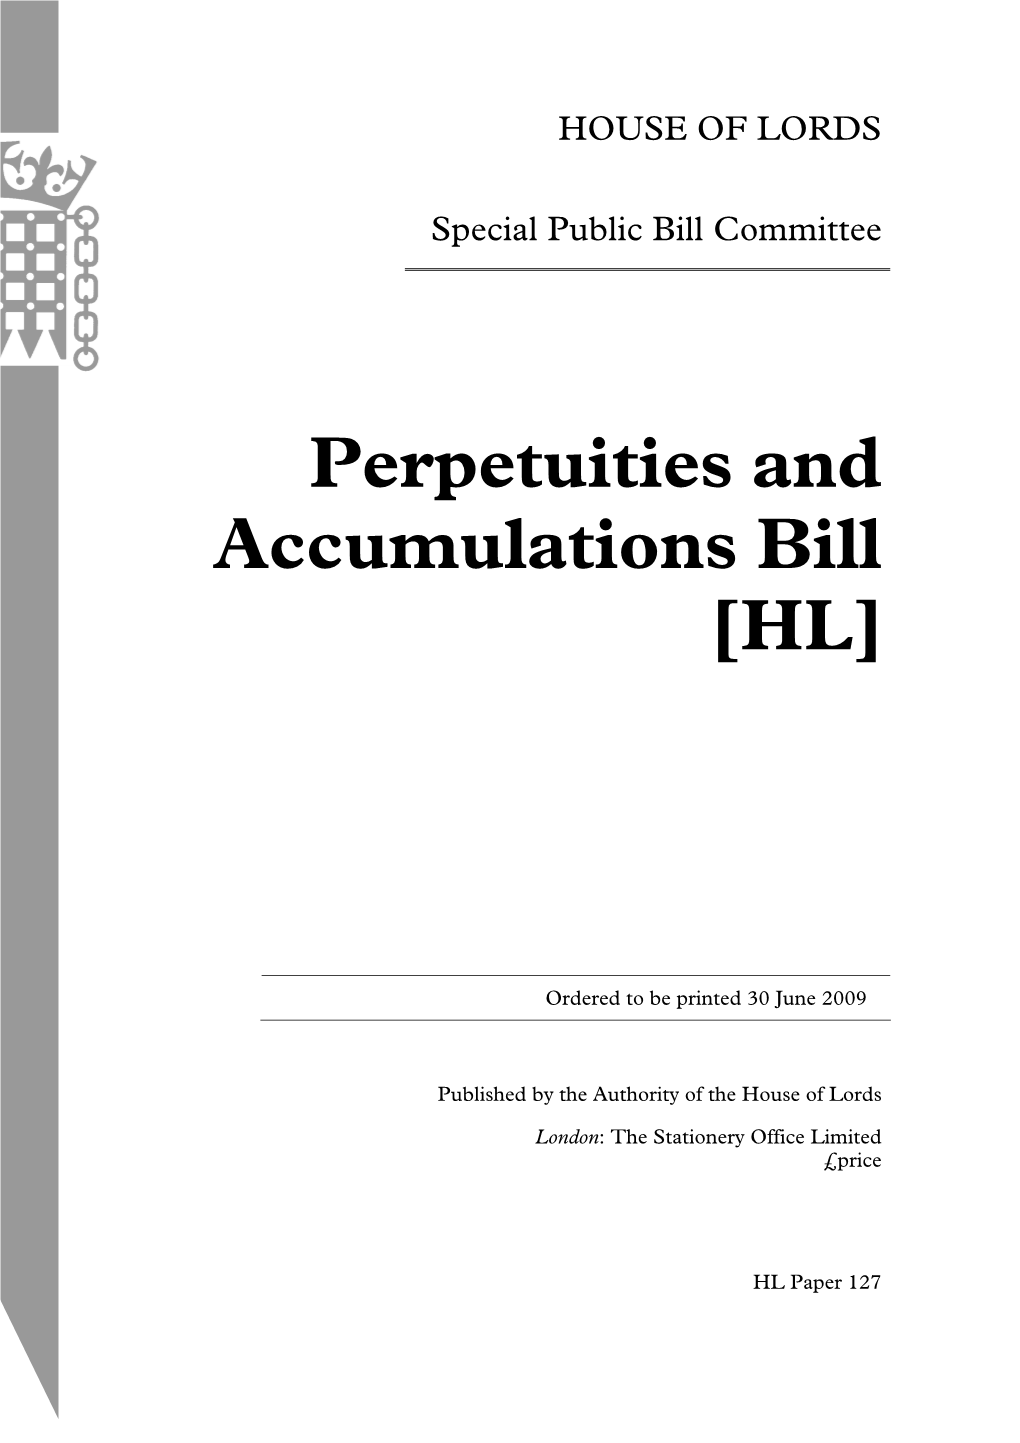 Perpetuities and Accumulations Bill [HL]